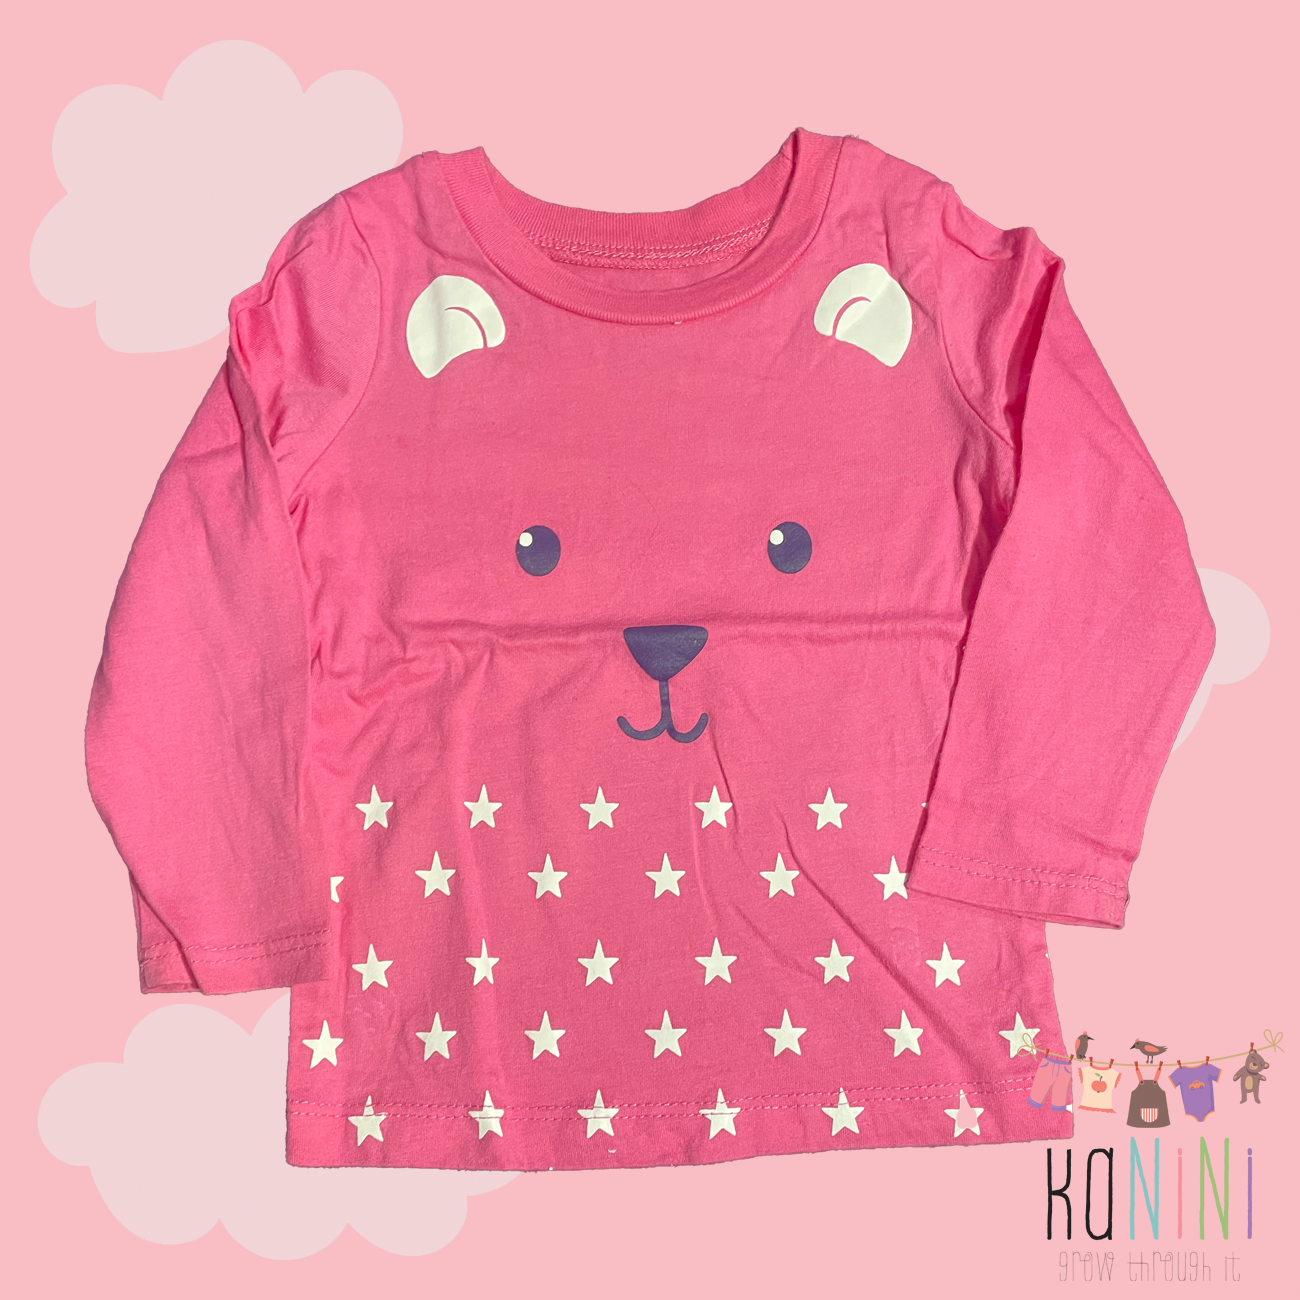 Featured image for “Carter's 12 Months Girls Long Sleeve T-Shirt”